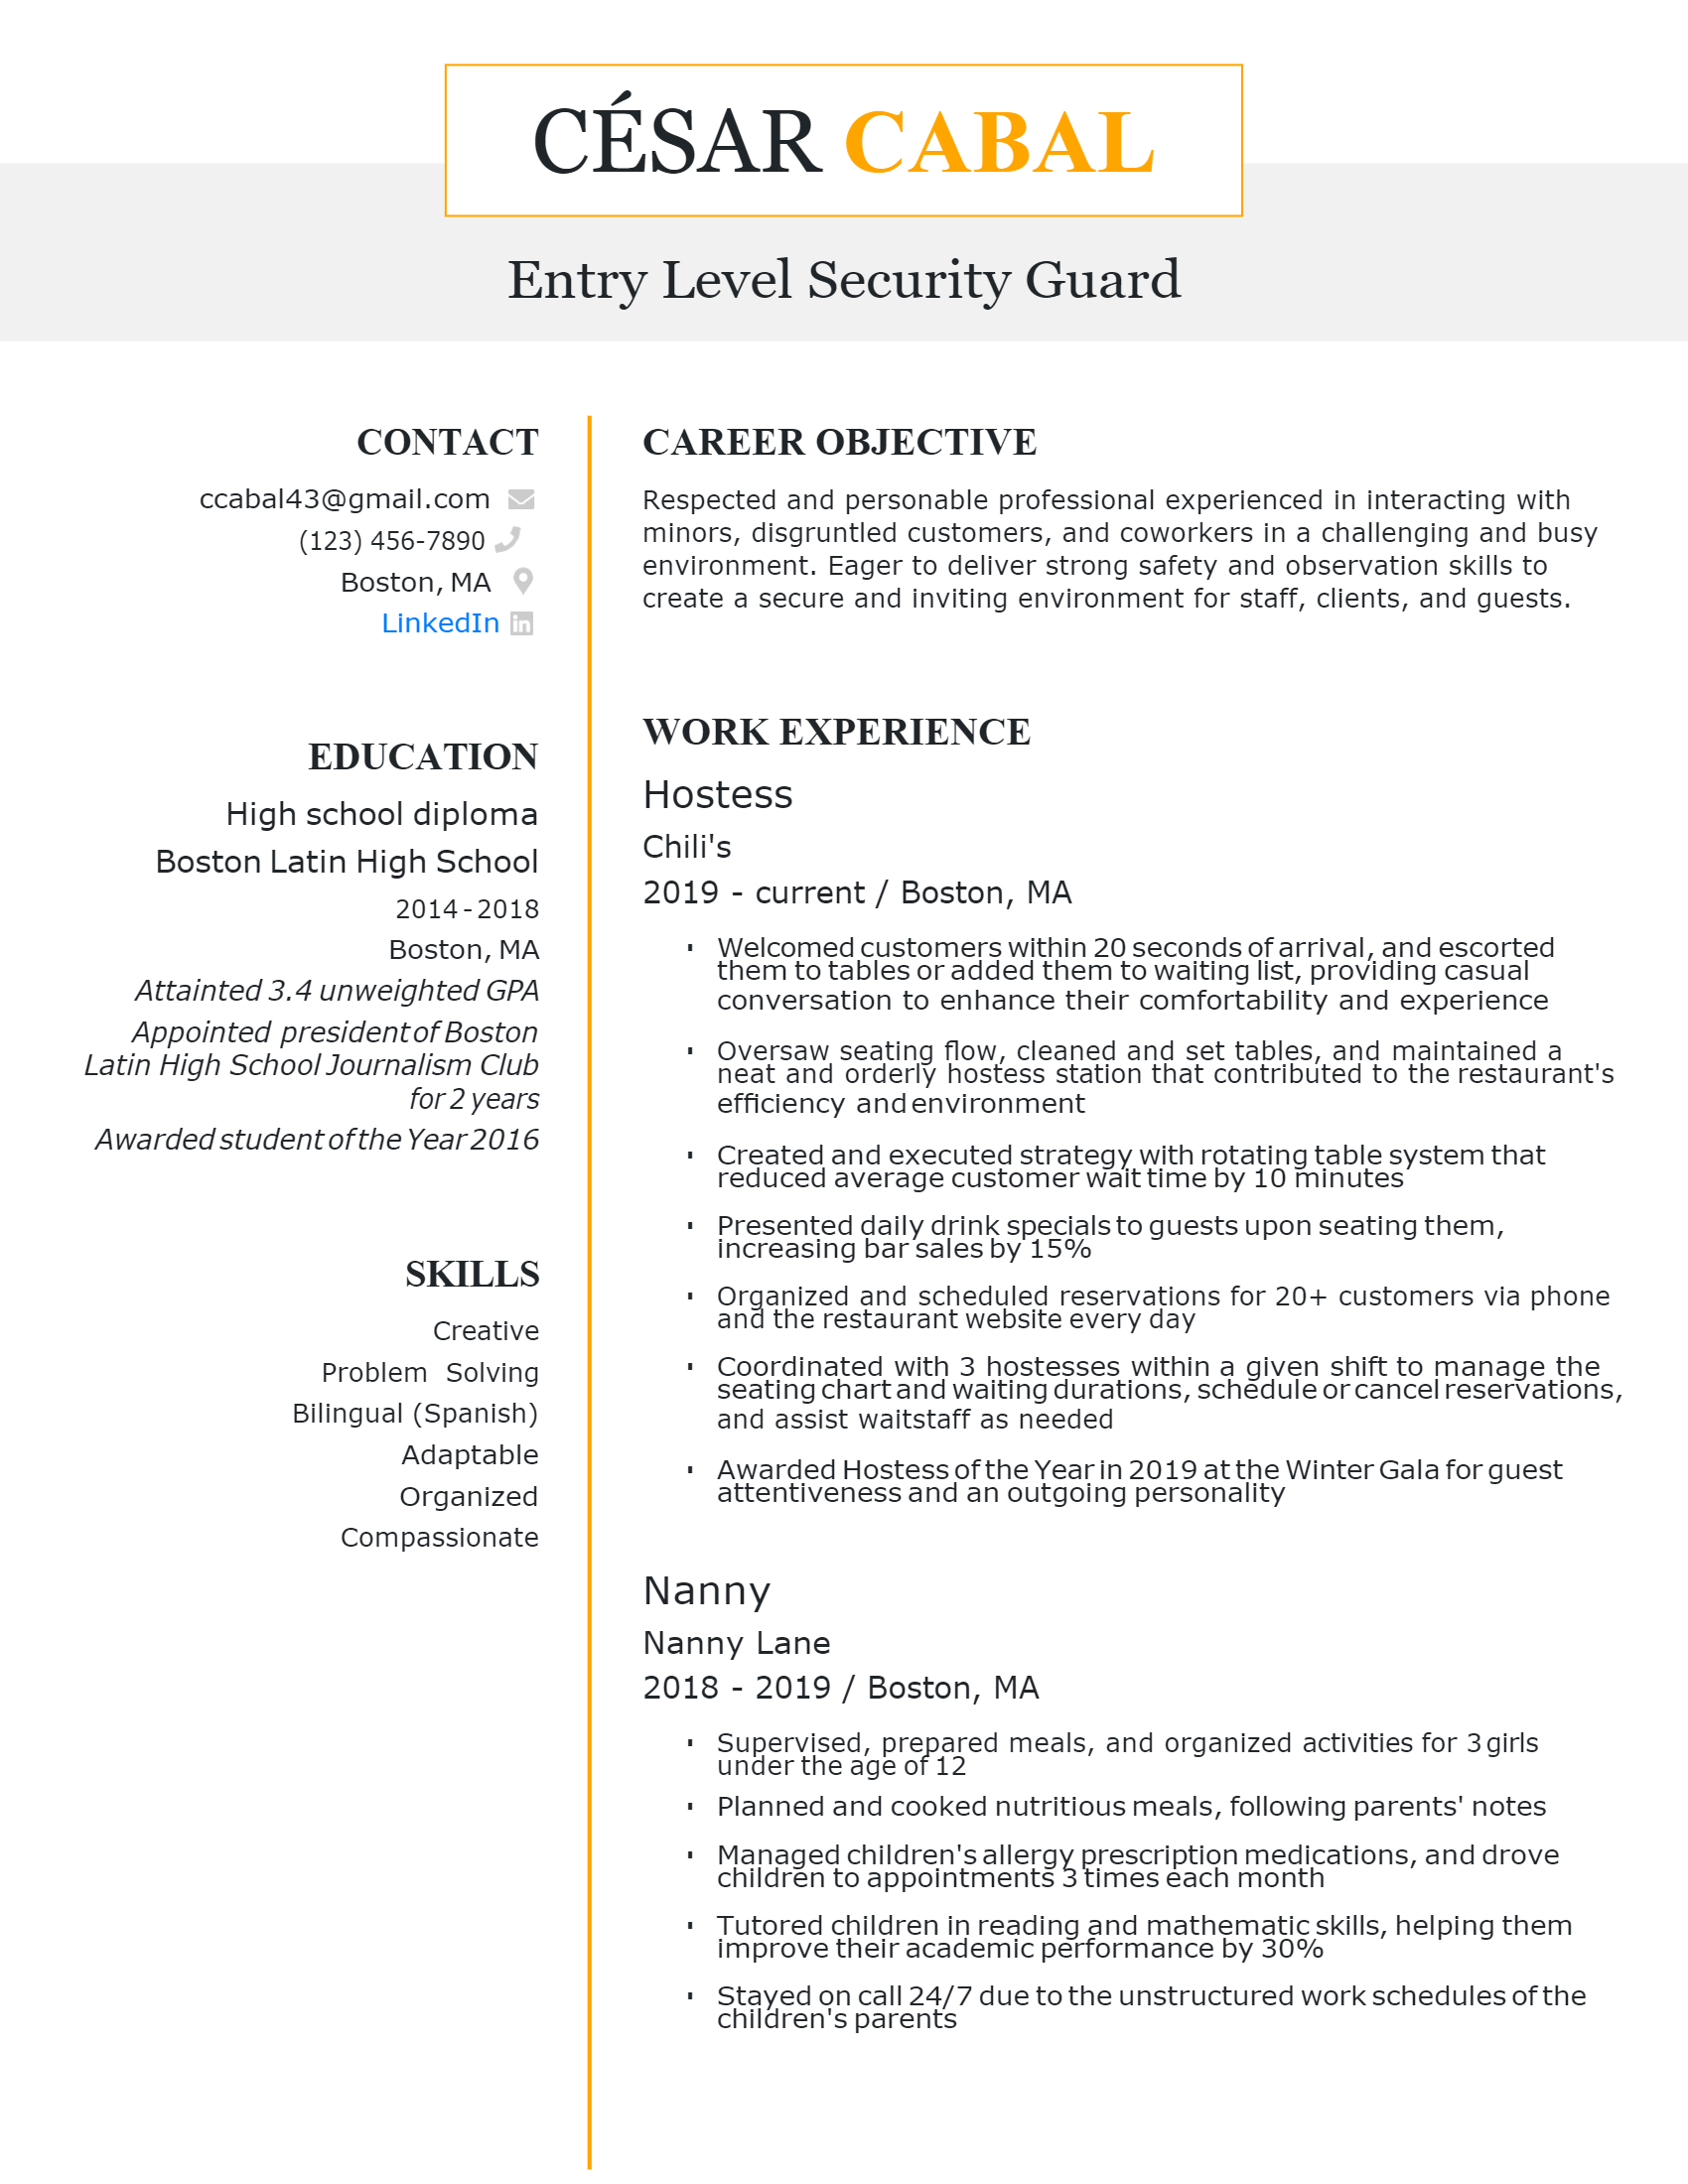 Entry-level Security Guard Resume .Docx (Word)